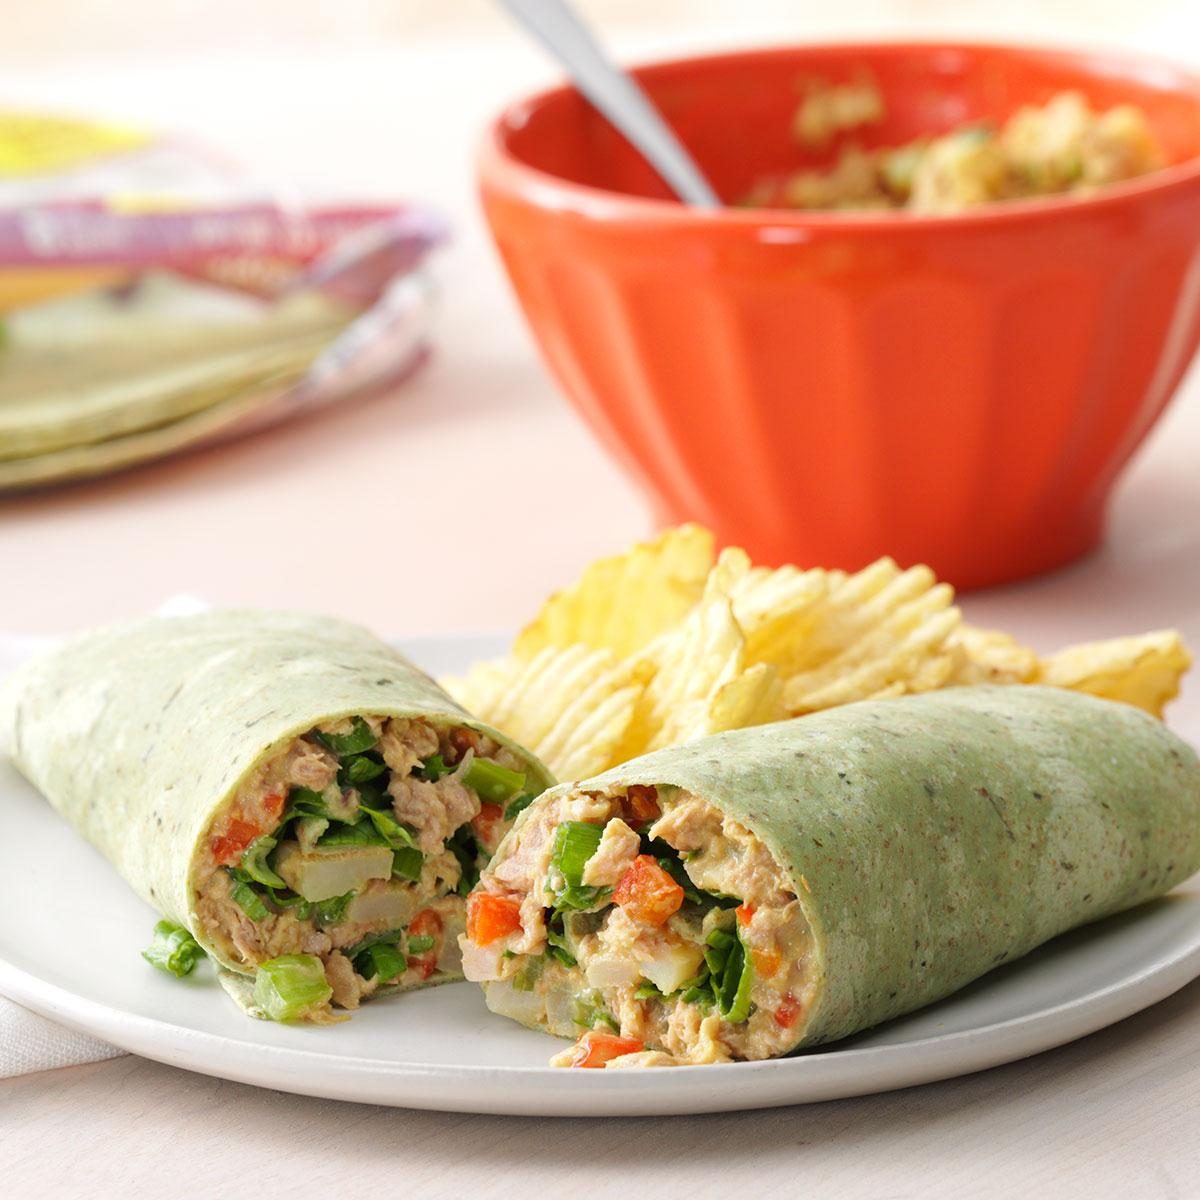 <p>Packed with protein-rich tuna and fresh, crunchy veggies, these colorful wraps have sensational flavor—and they're good for you, too. —Edie Farm, Farmington, New Mexico</p> <div class="listicle-page__buttons"> <div class="listicle-page__cta-button"><a href='https://www.tasteofhome.com/recipes/crunchy-tuna-wraps/'>Get Recipe</a></div> </div>